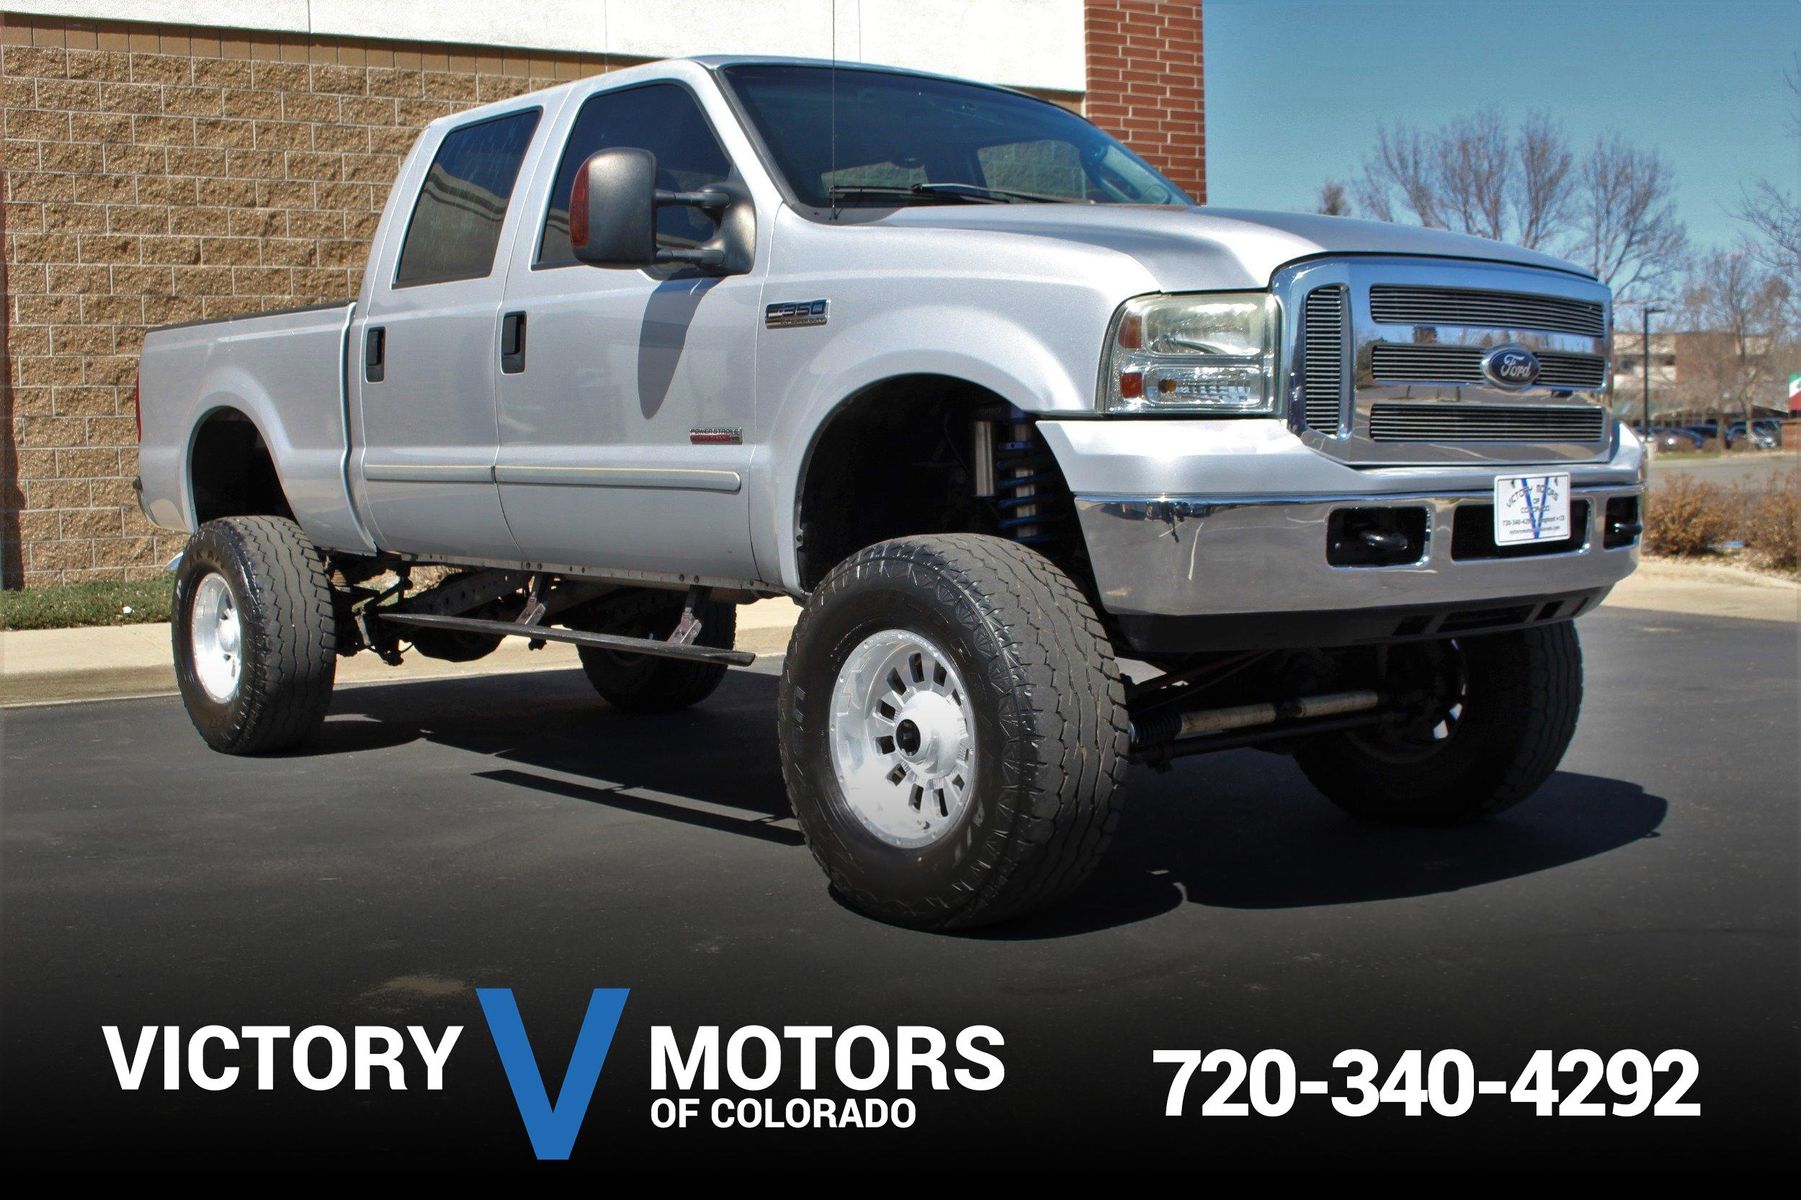 2006 Ford F-350 Super Duty XLT | Victory Motors of Colorado 2006 Ford F350 Abs Light Stays On